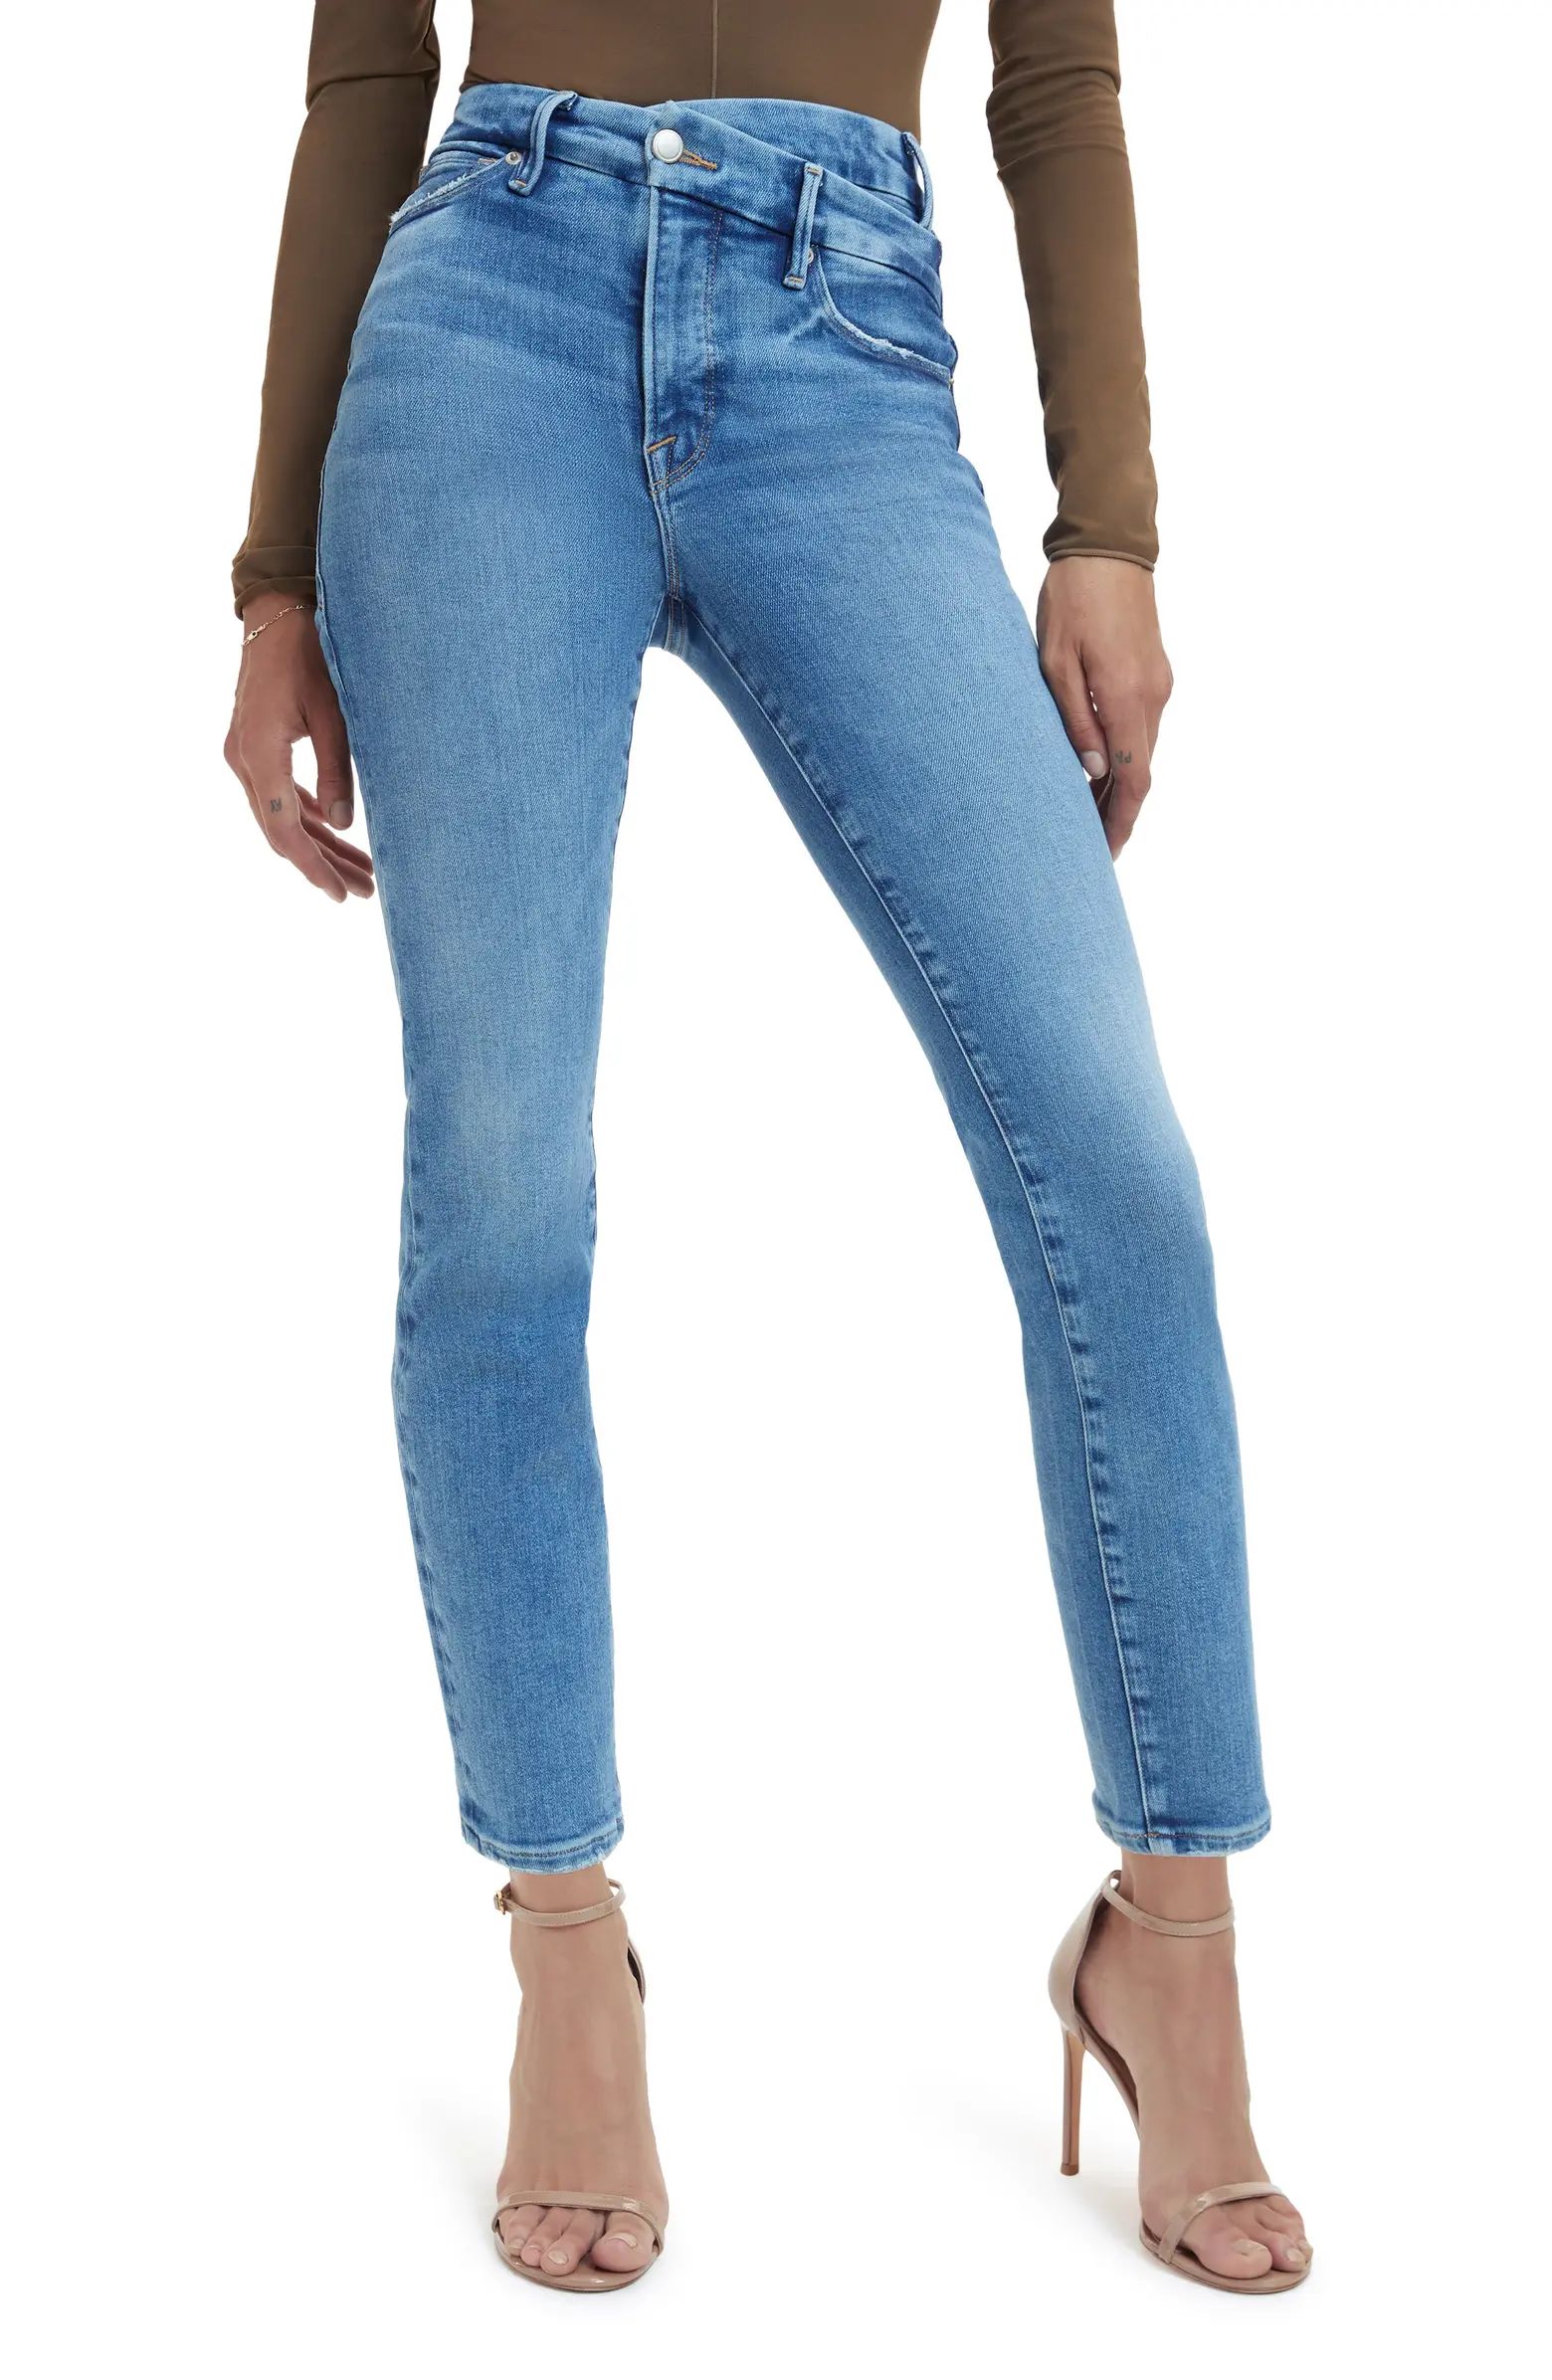 Good Classic Crossover High Waist Jeans | Nordstrom